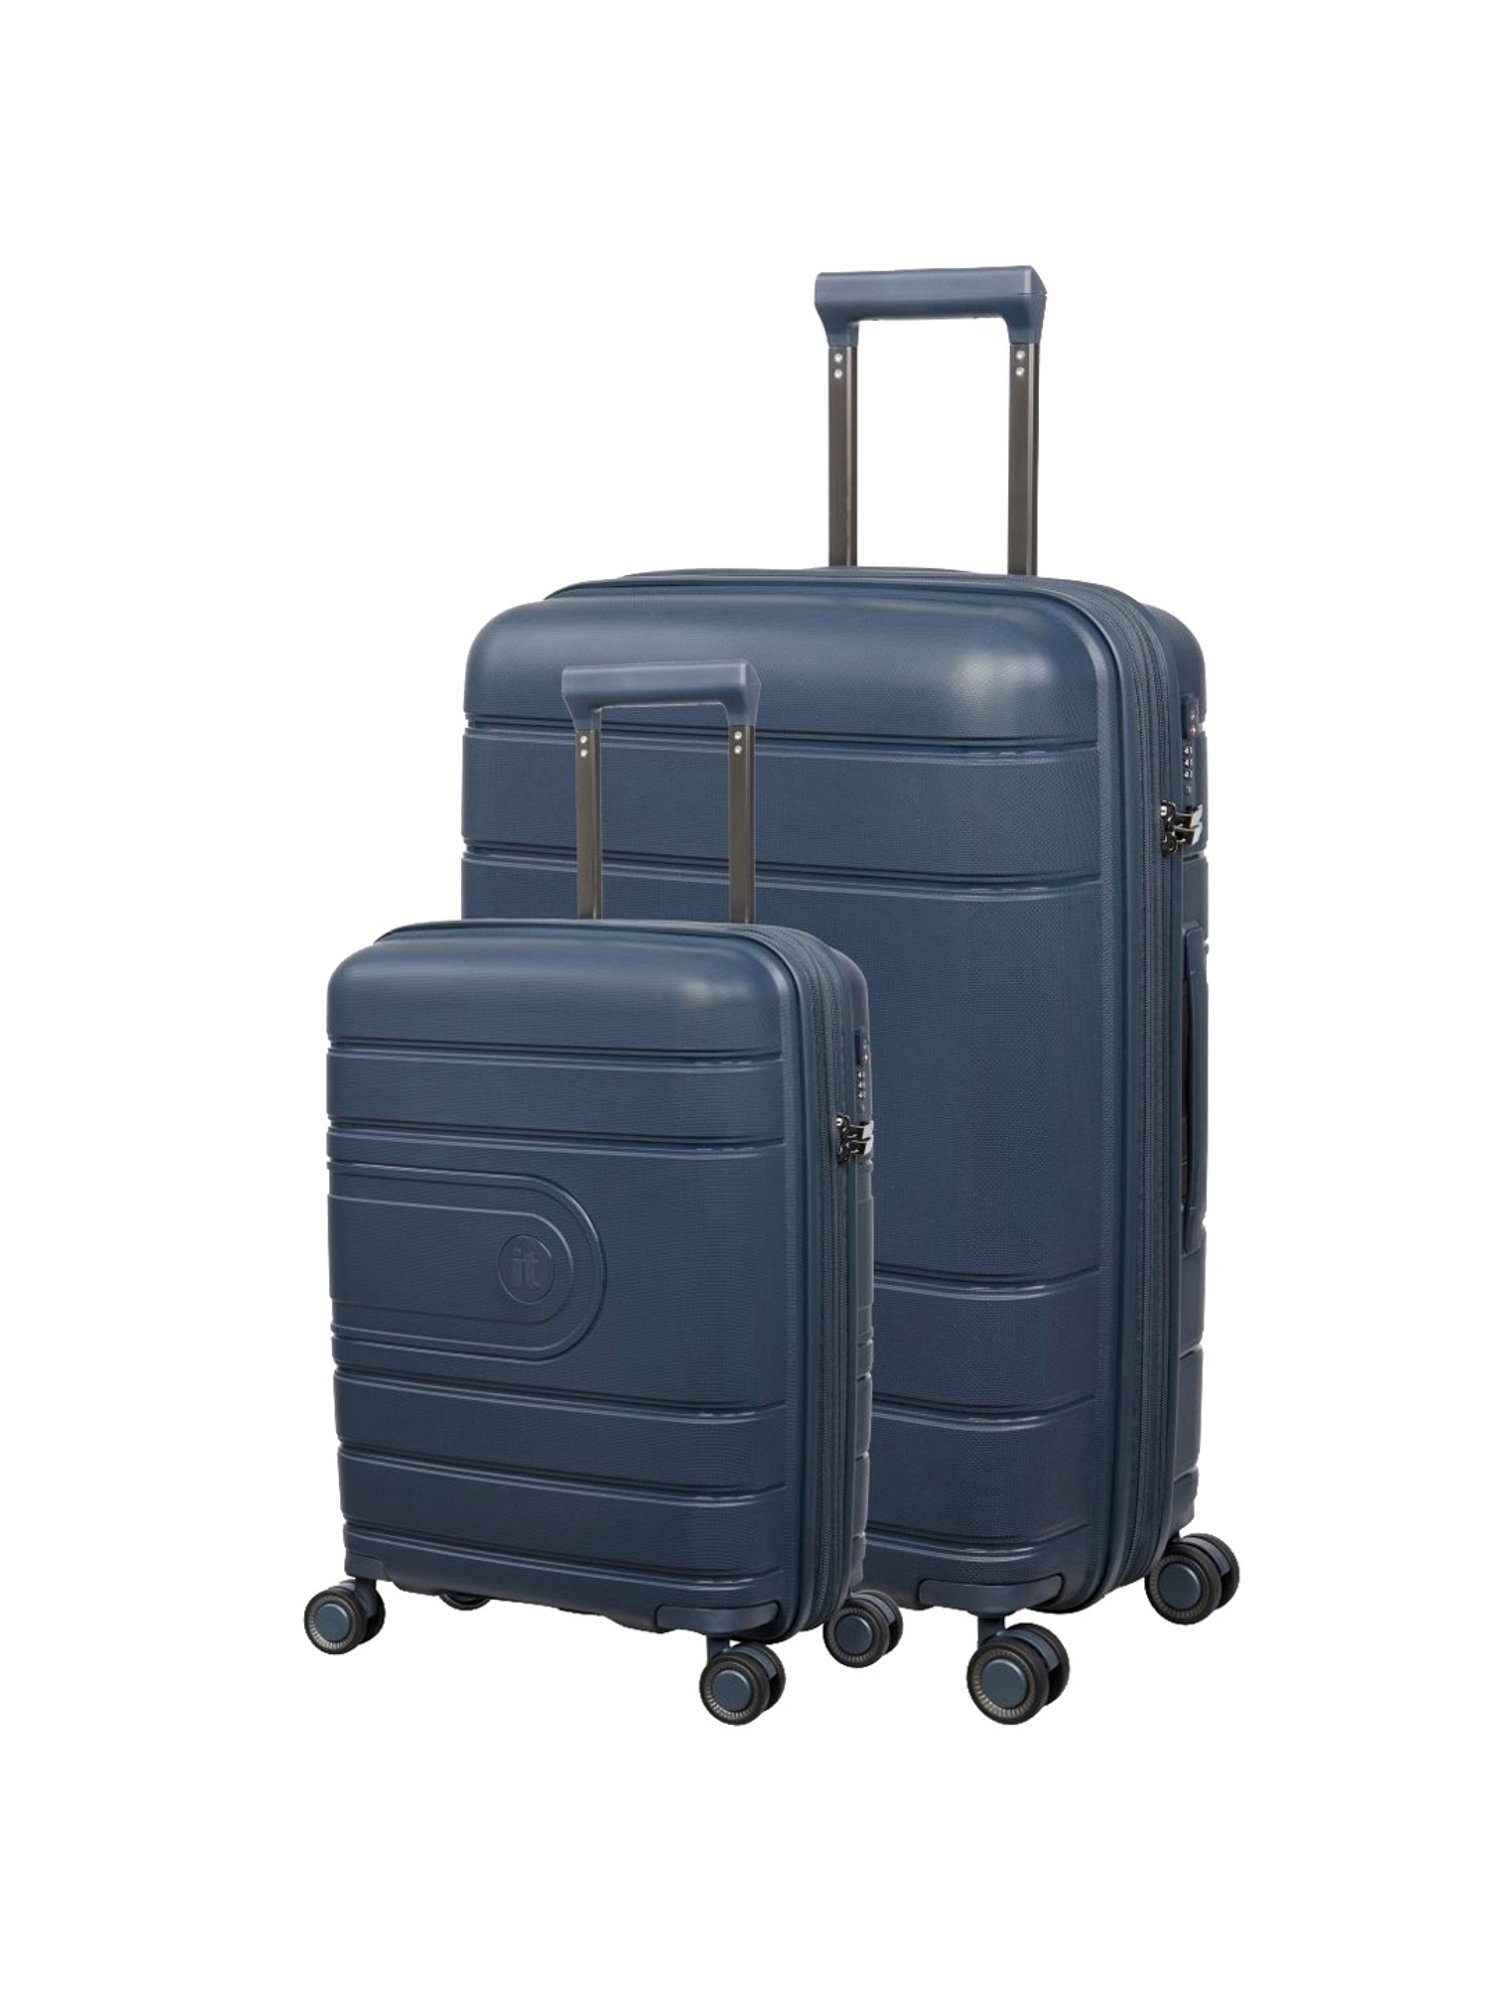 Bell Weather 3 Piece Luggage Suitcase Set with 4 Spinner Wheels | Carr –  Traveler's Choice